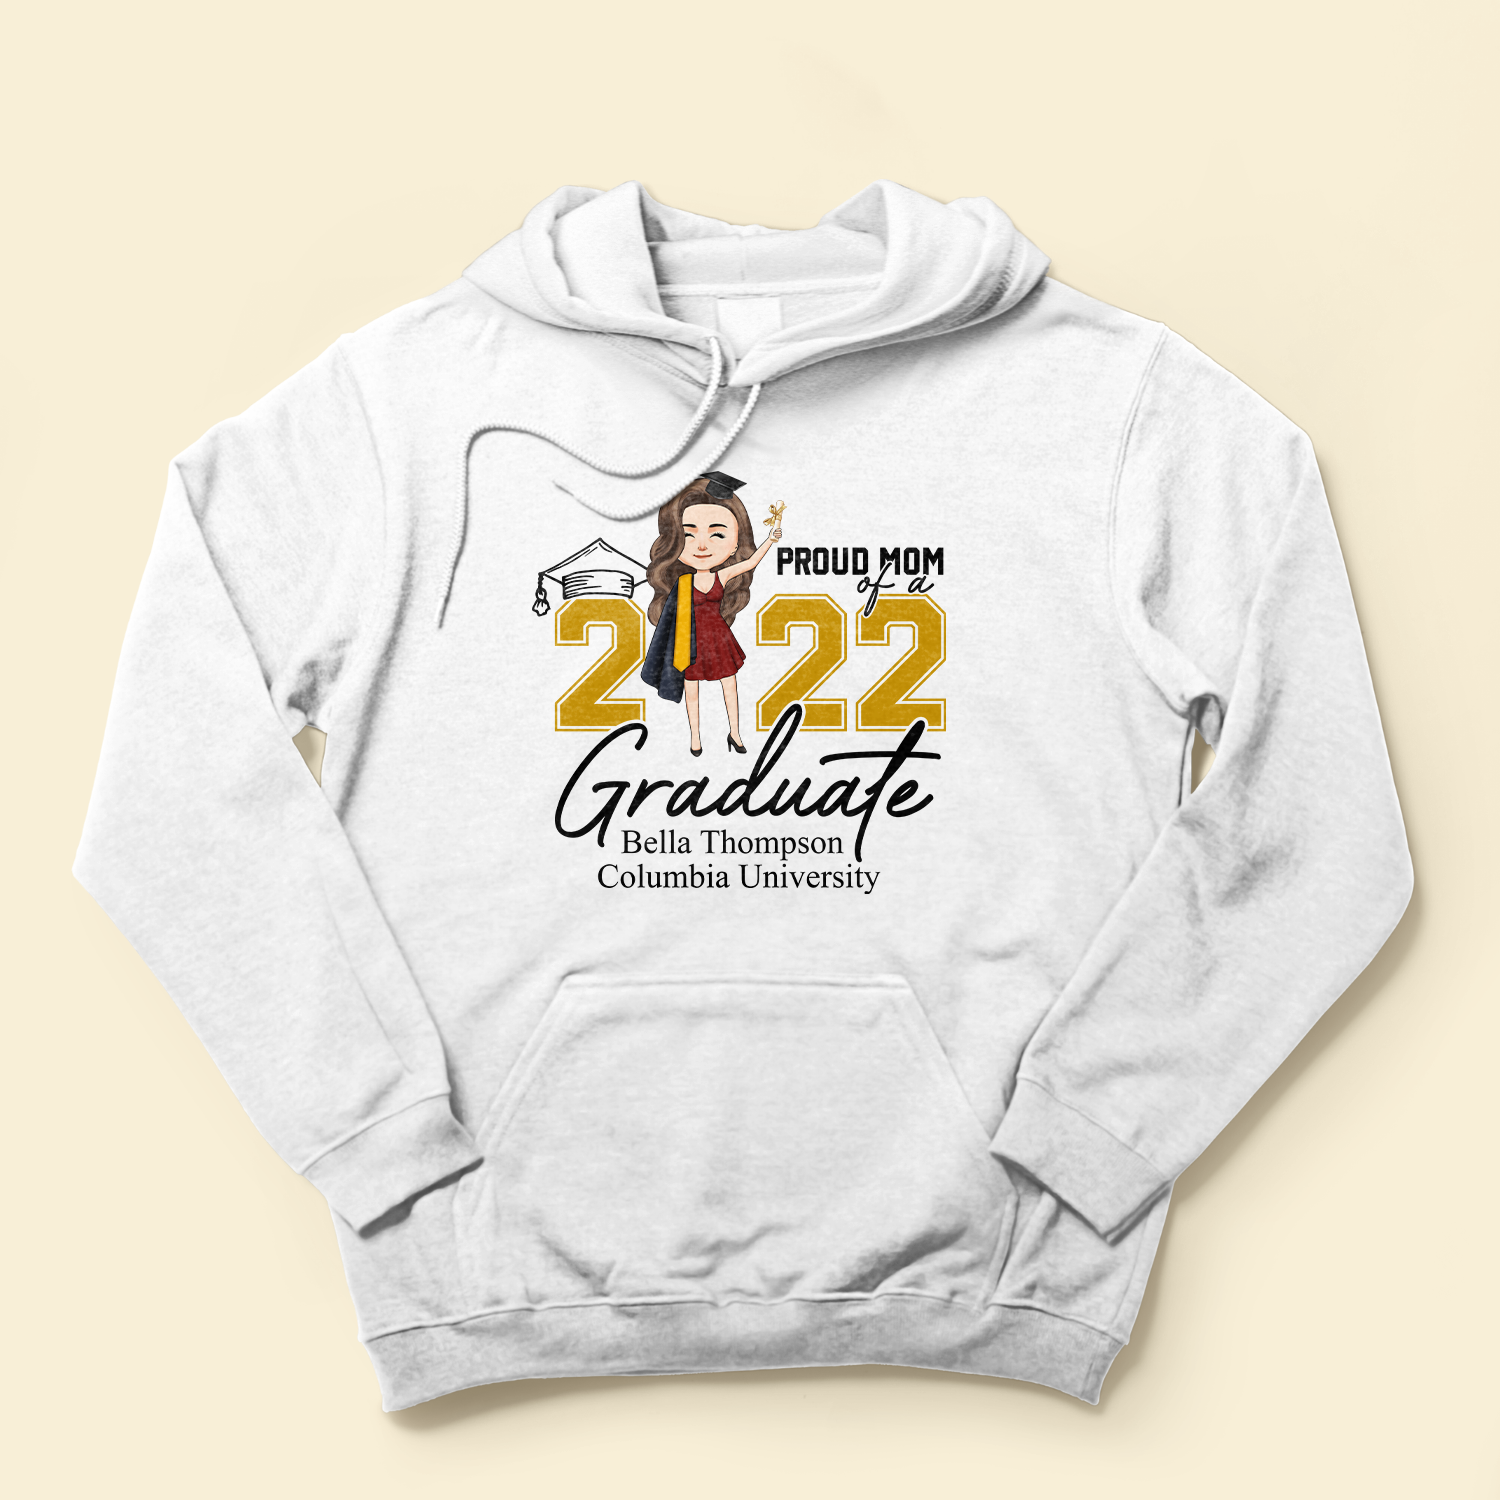 Proud Family Of A 2022 Graduate - Personalized Shirt - Graduation, Year End, School Leaving Gift For Graduate Student'S Family, Seniors' Mom & Dad, Brother & Sister